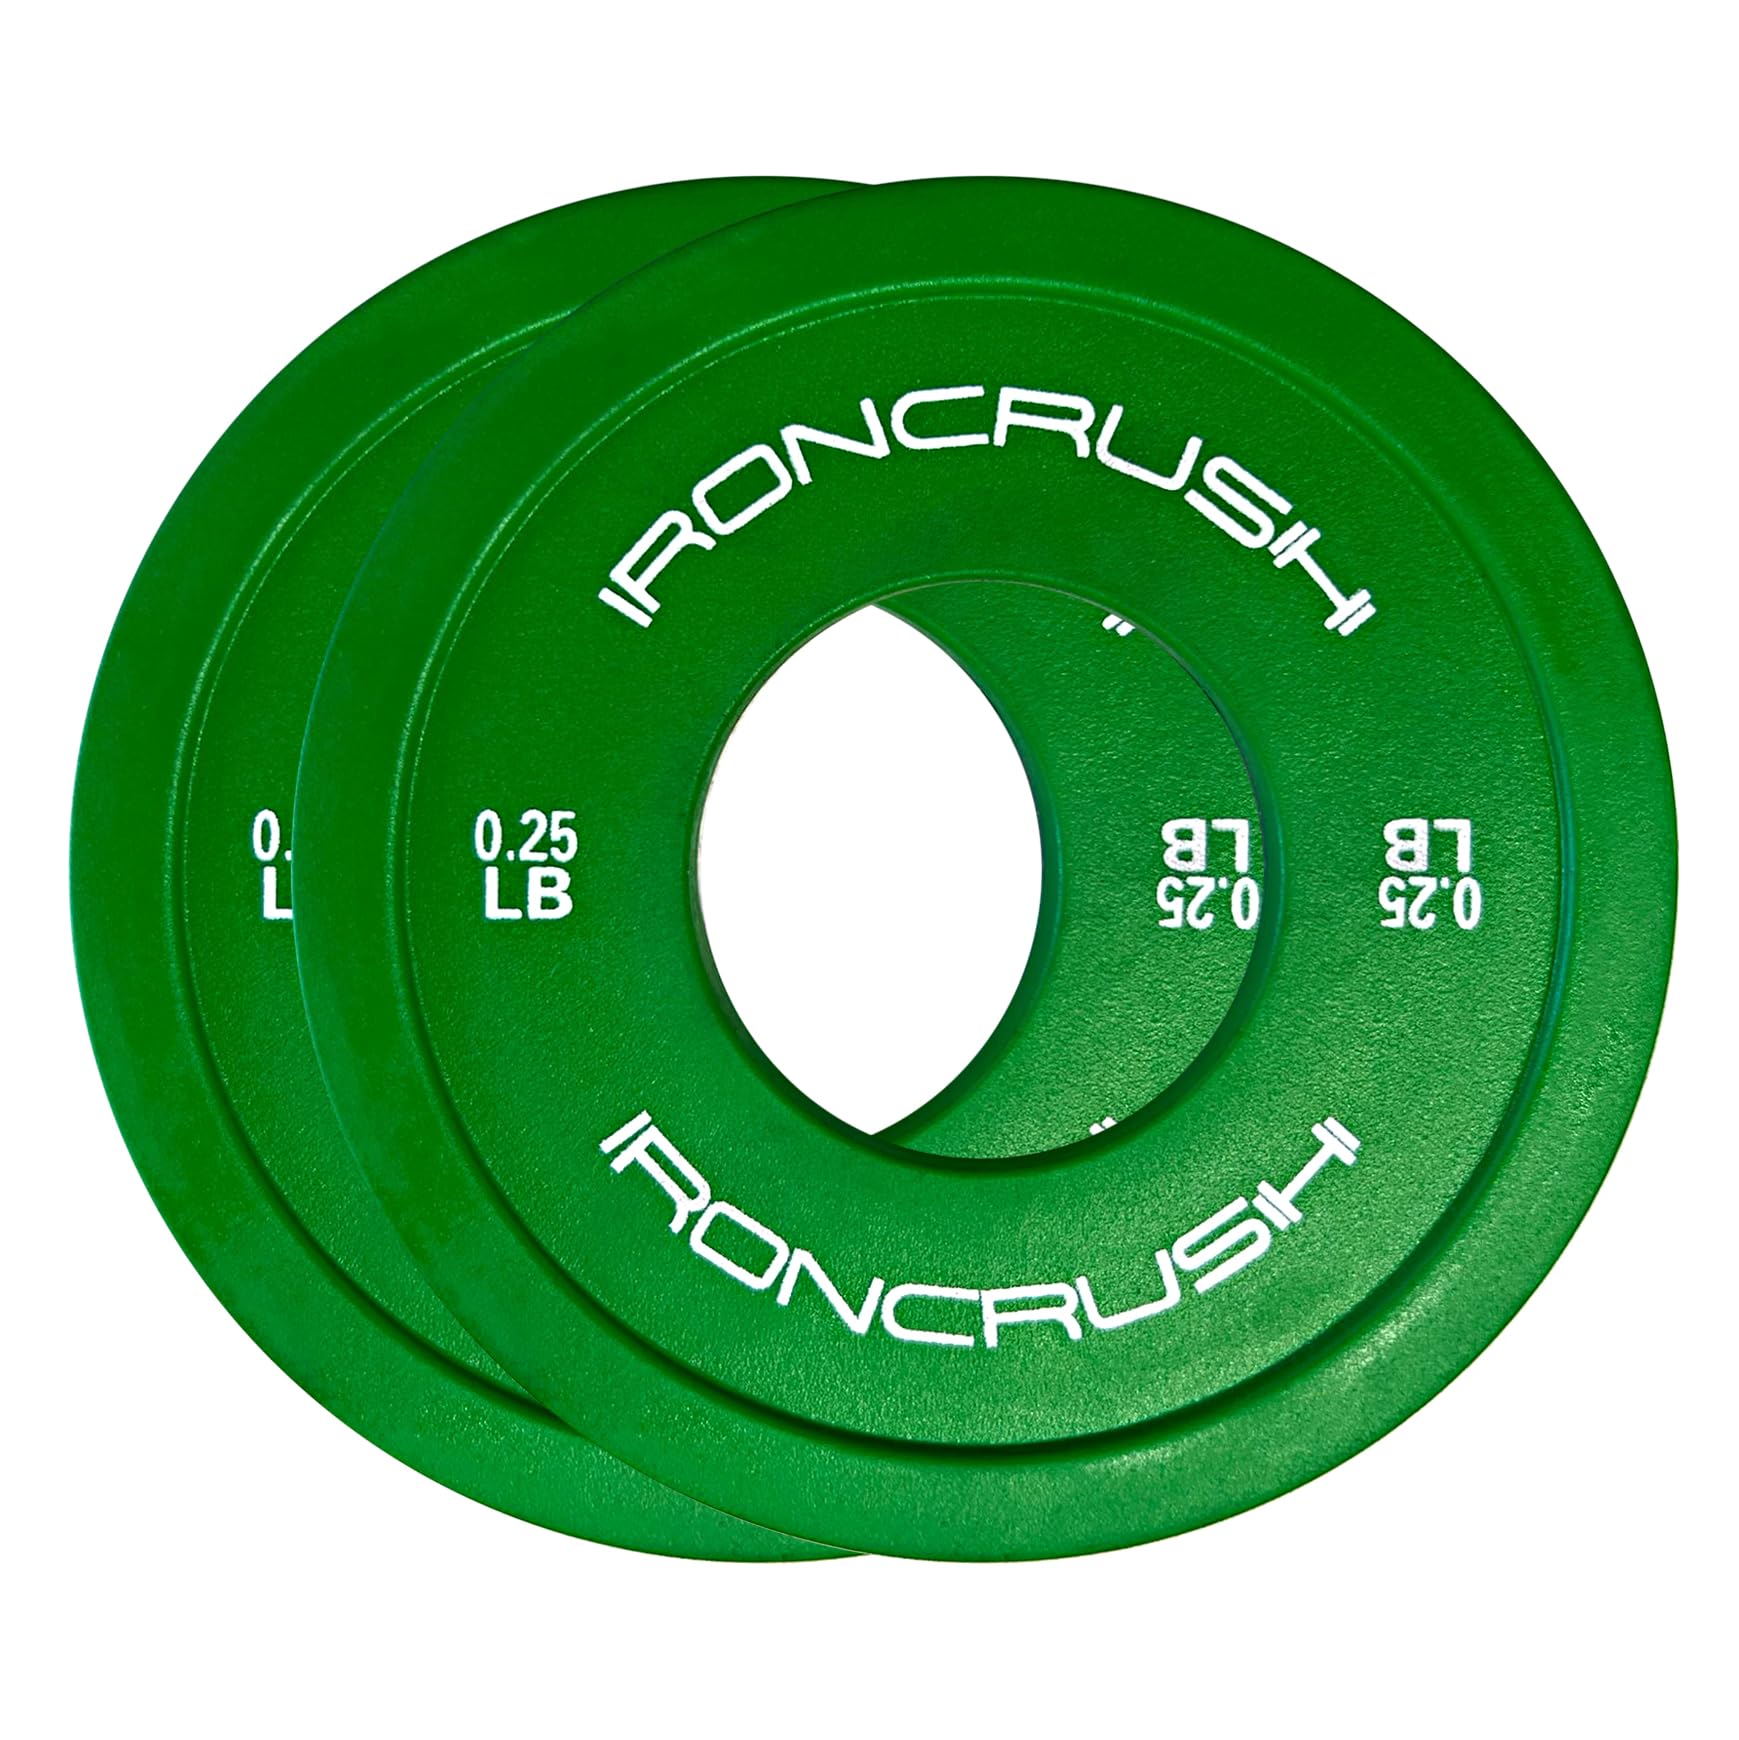 Iron Crush Fractional Weight Plates - Olympic Plates with Improved Center Holes - Durable, Shockproof Virgin Rubber - Gym Equipment for Strength & Endurance Training